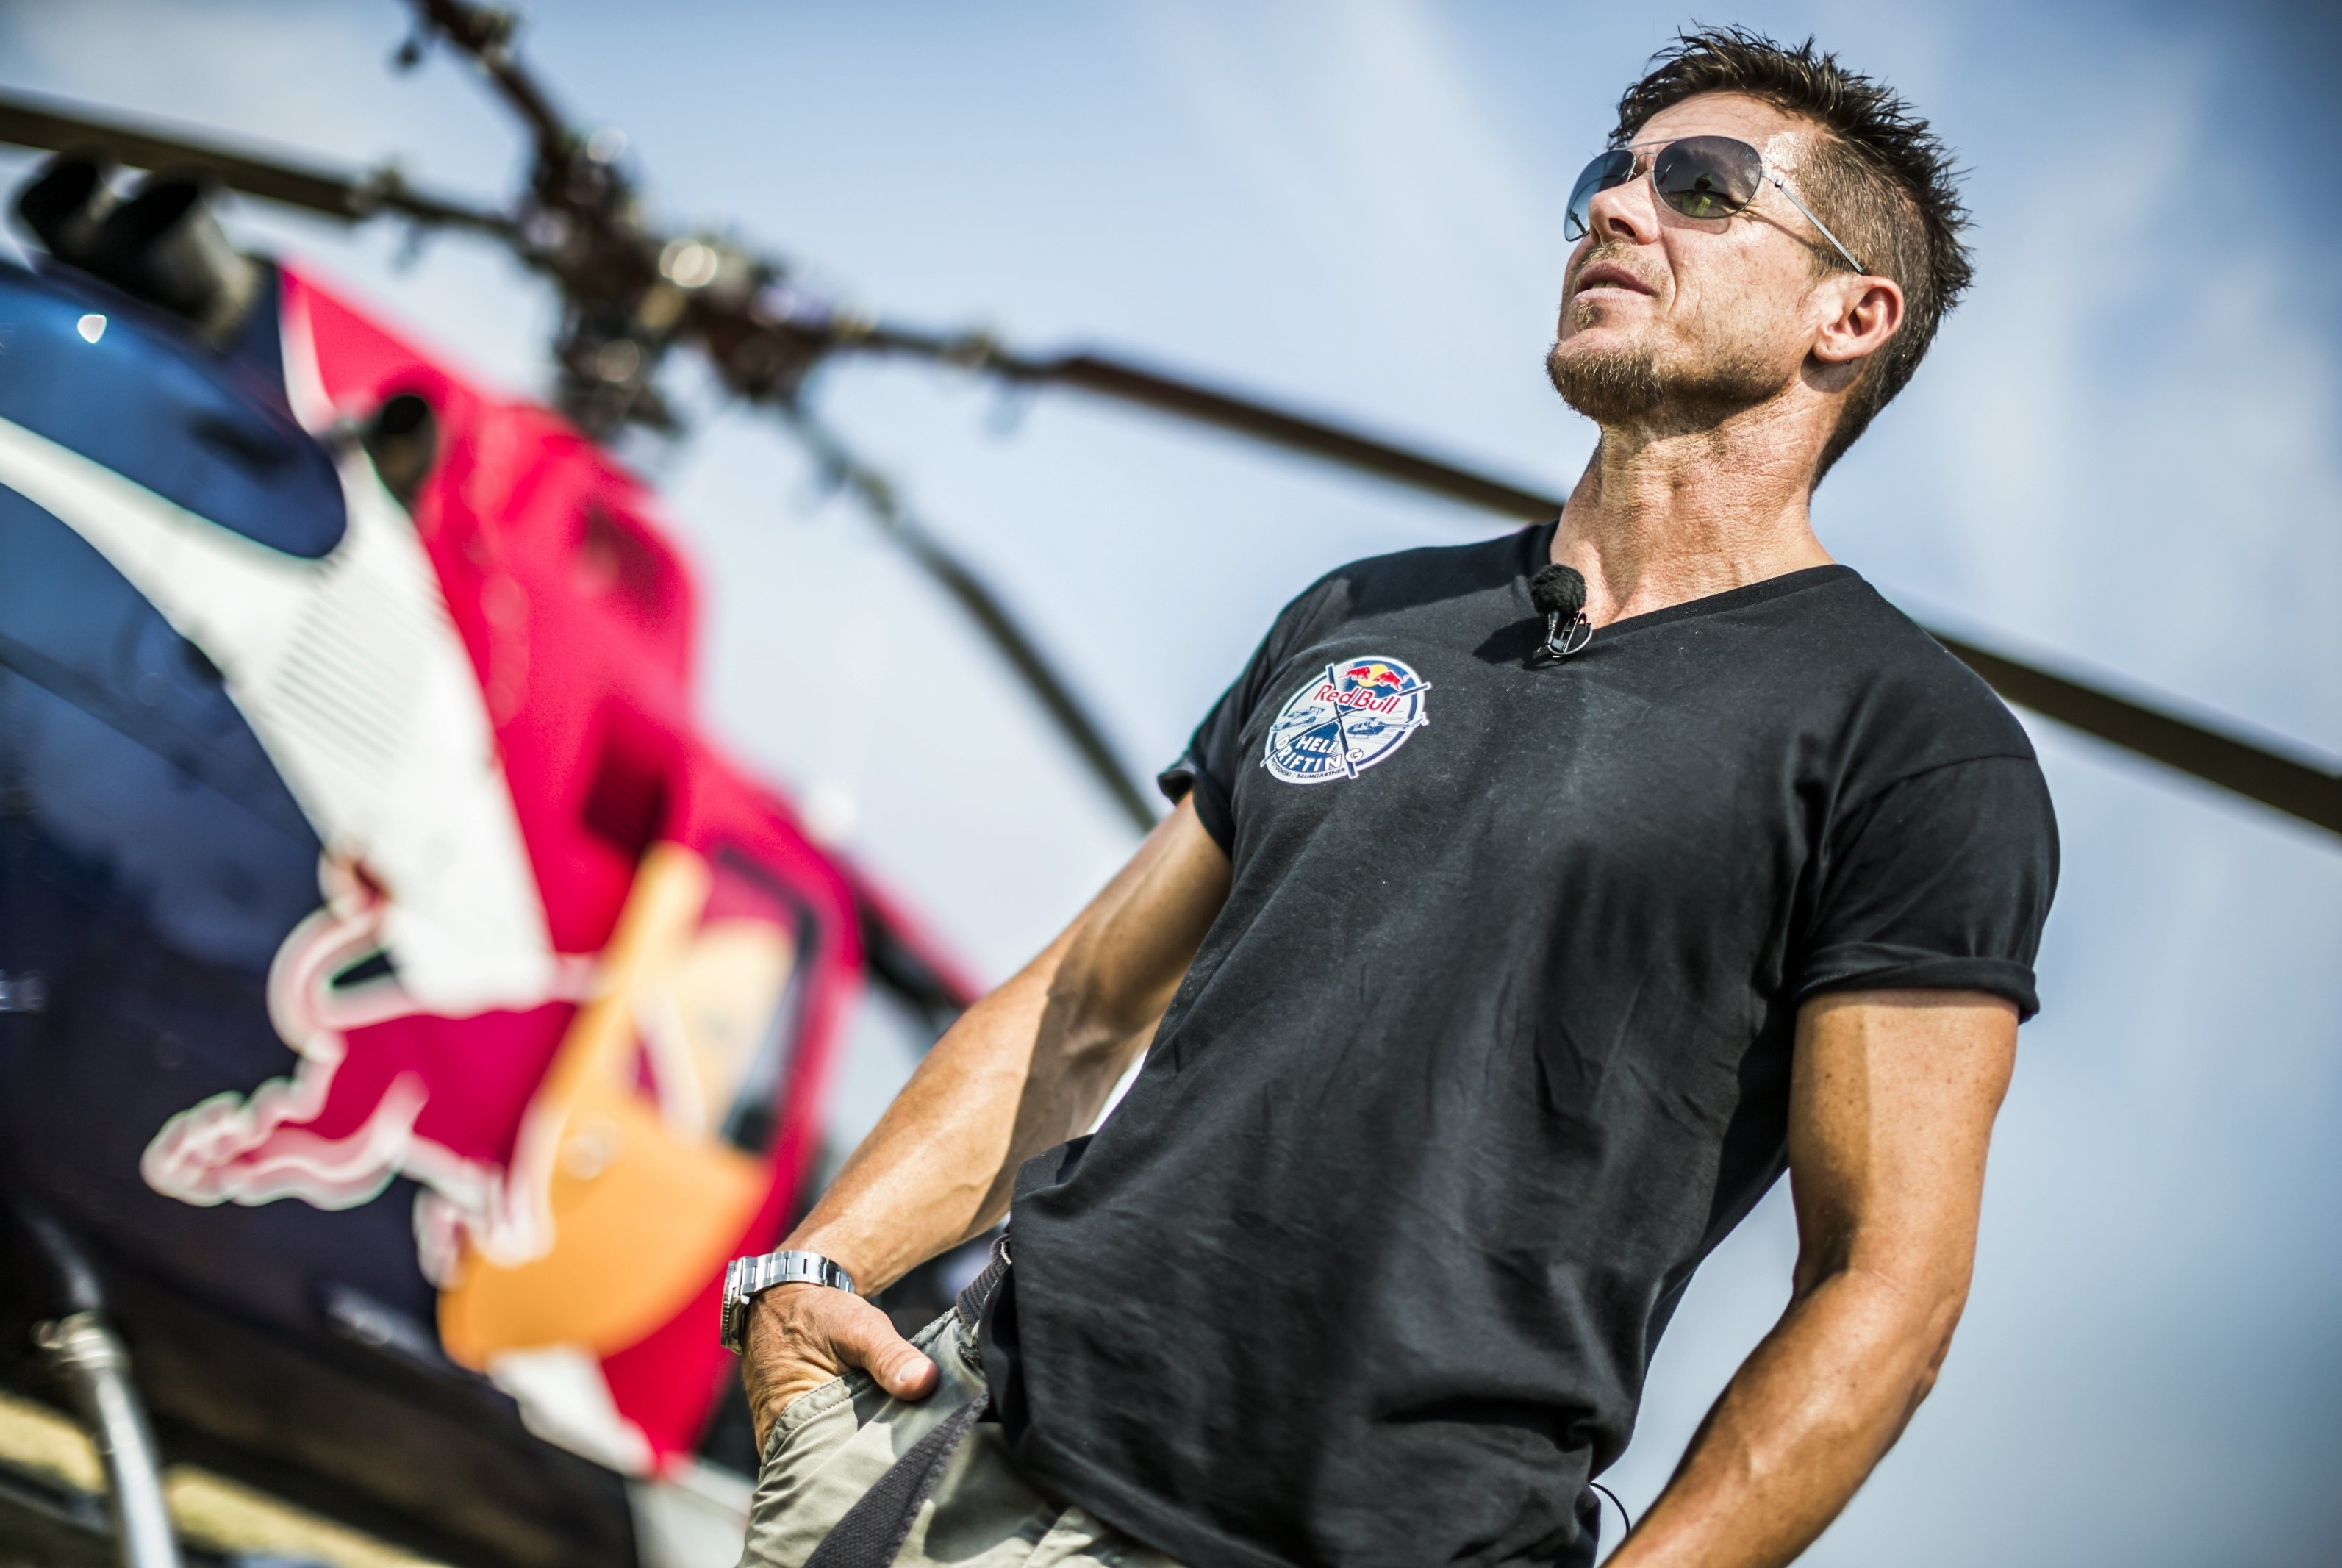 Win a trip with Felix Baumgartner! Photocredit: Red Bull.